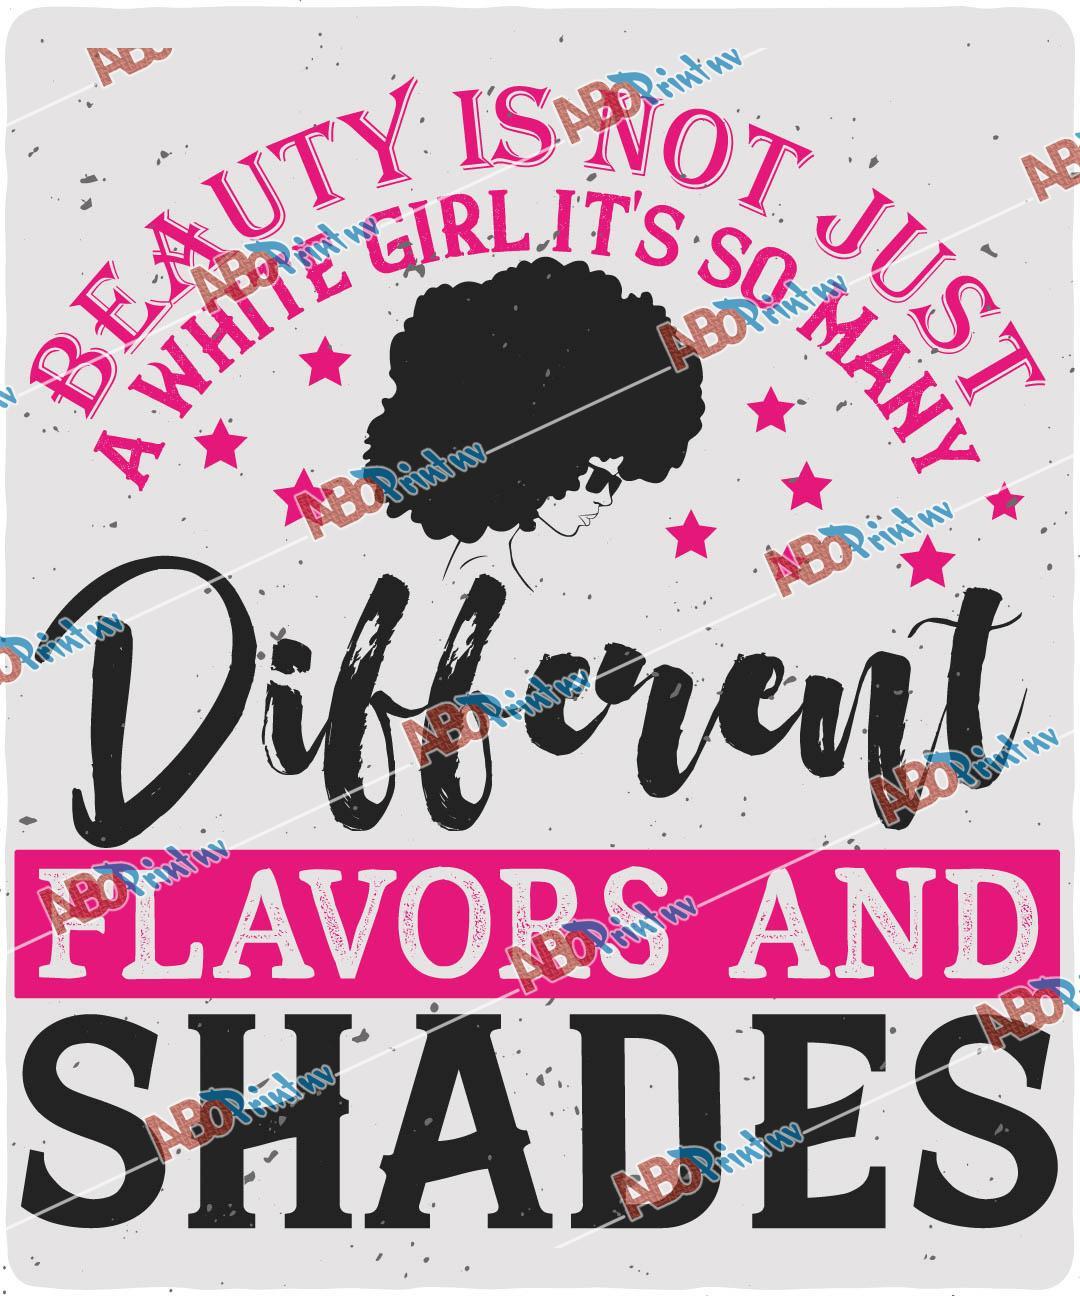 Beauty is not just a white girl. It's so many different flavors and shades V2.jpg